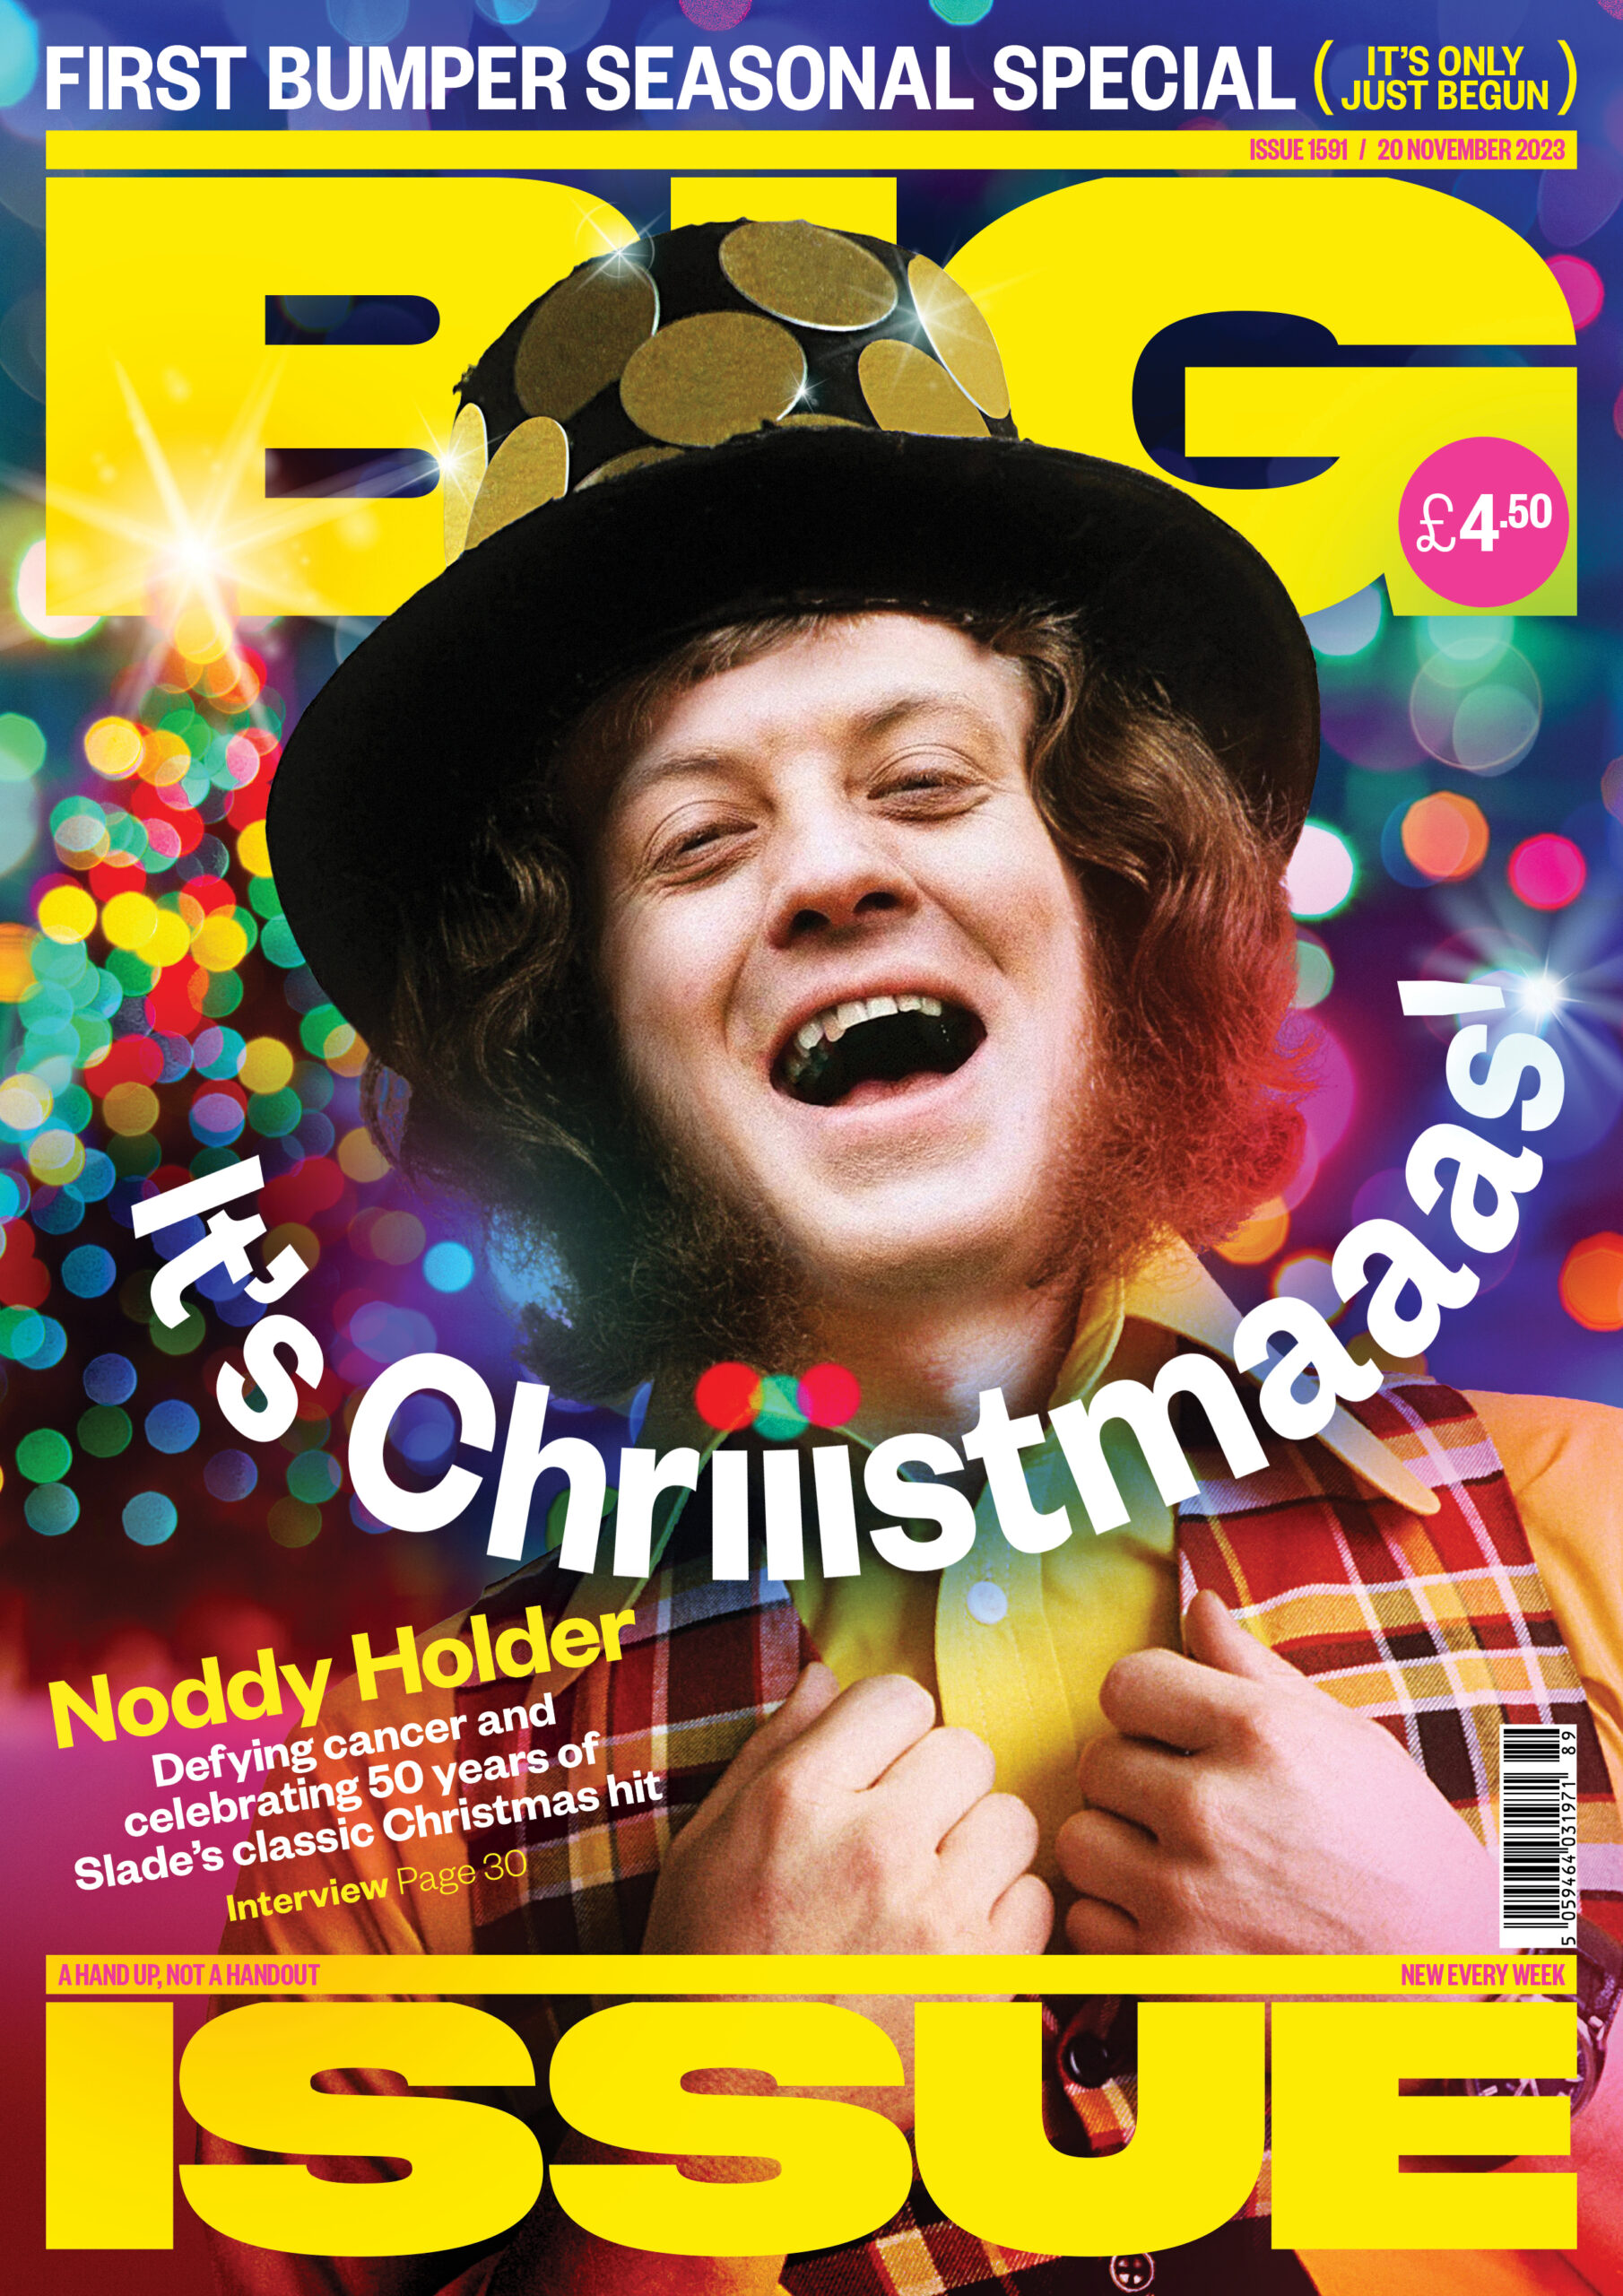 Noddy Holder on the cover of The Big Issue